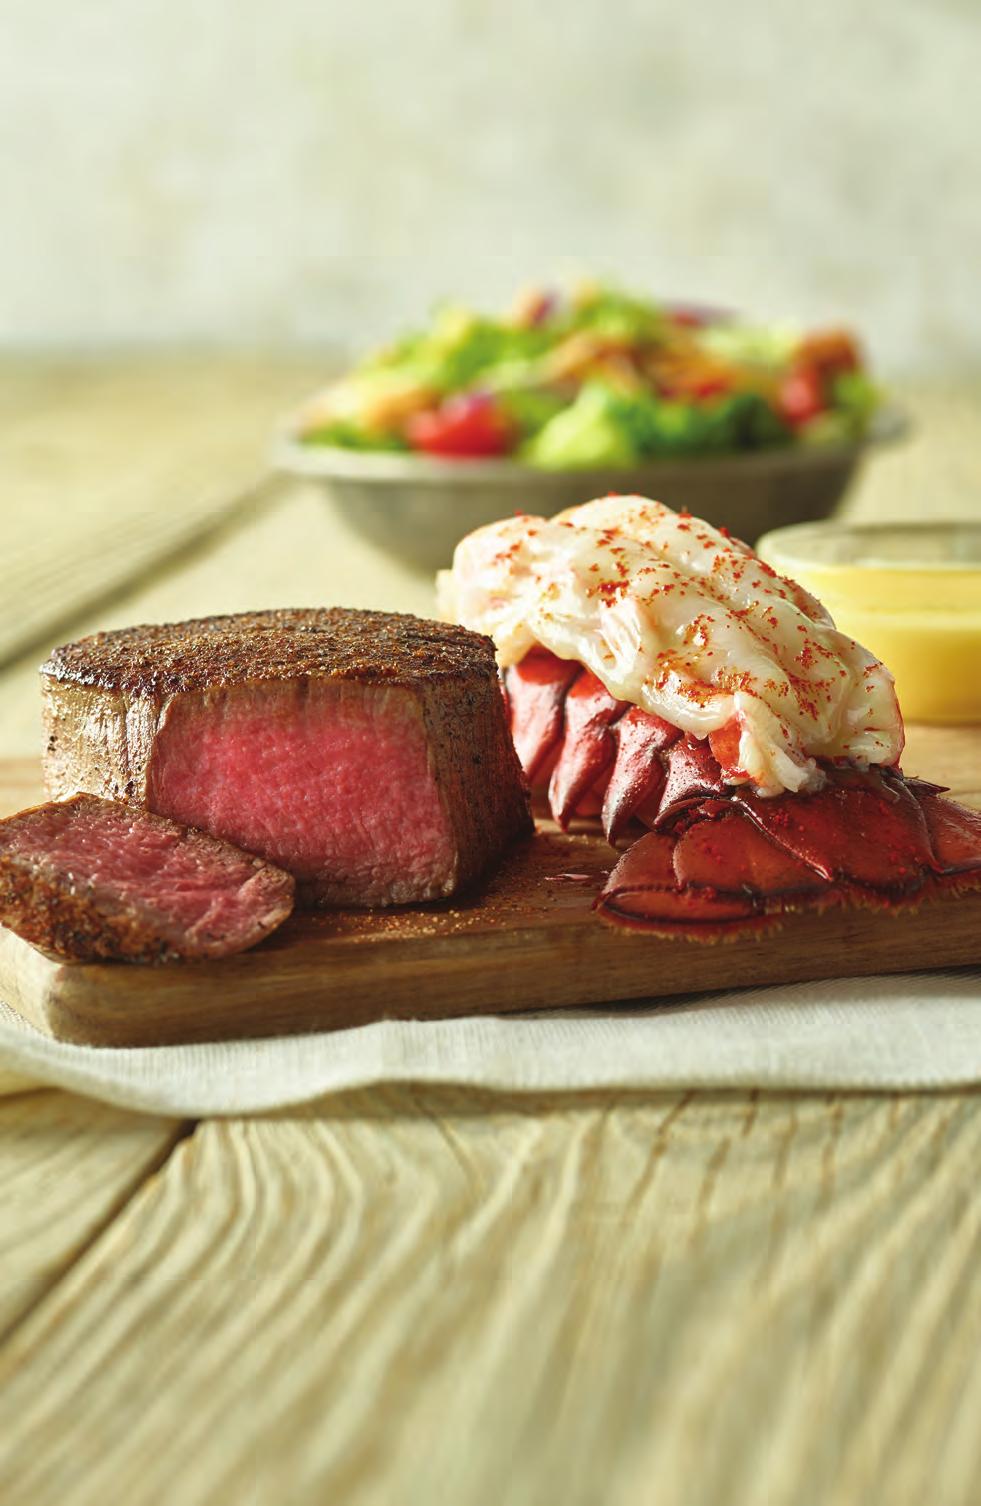 Visit OUTBACK.COM/EXPRESS to place an order online. WE CATER! Call for more details.